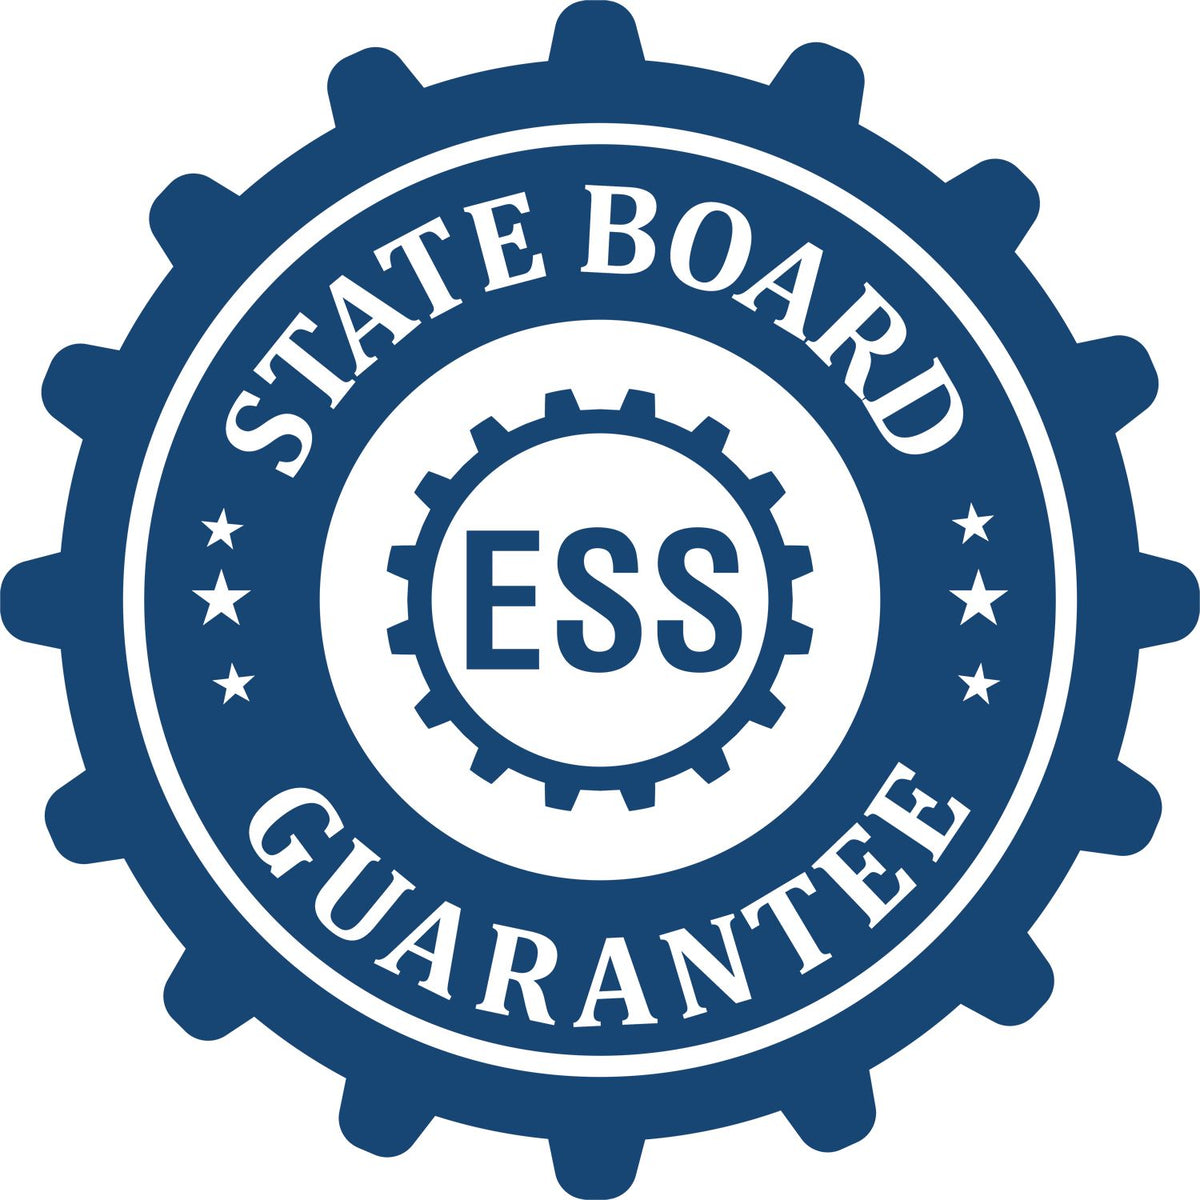 An emblem in a gear shape illustrating a state board guarantee for the Heavy Duty Cast Iron Louisiana Architect Embosser product.